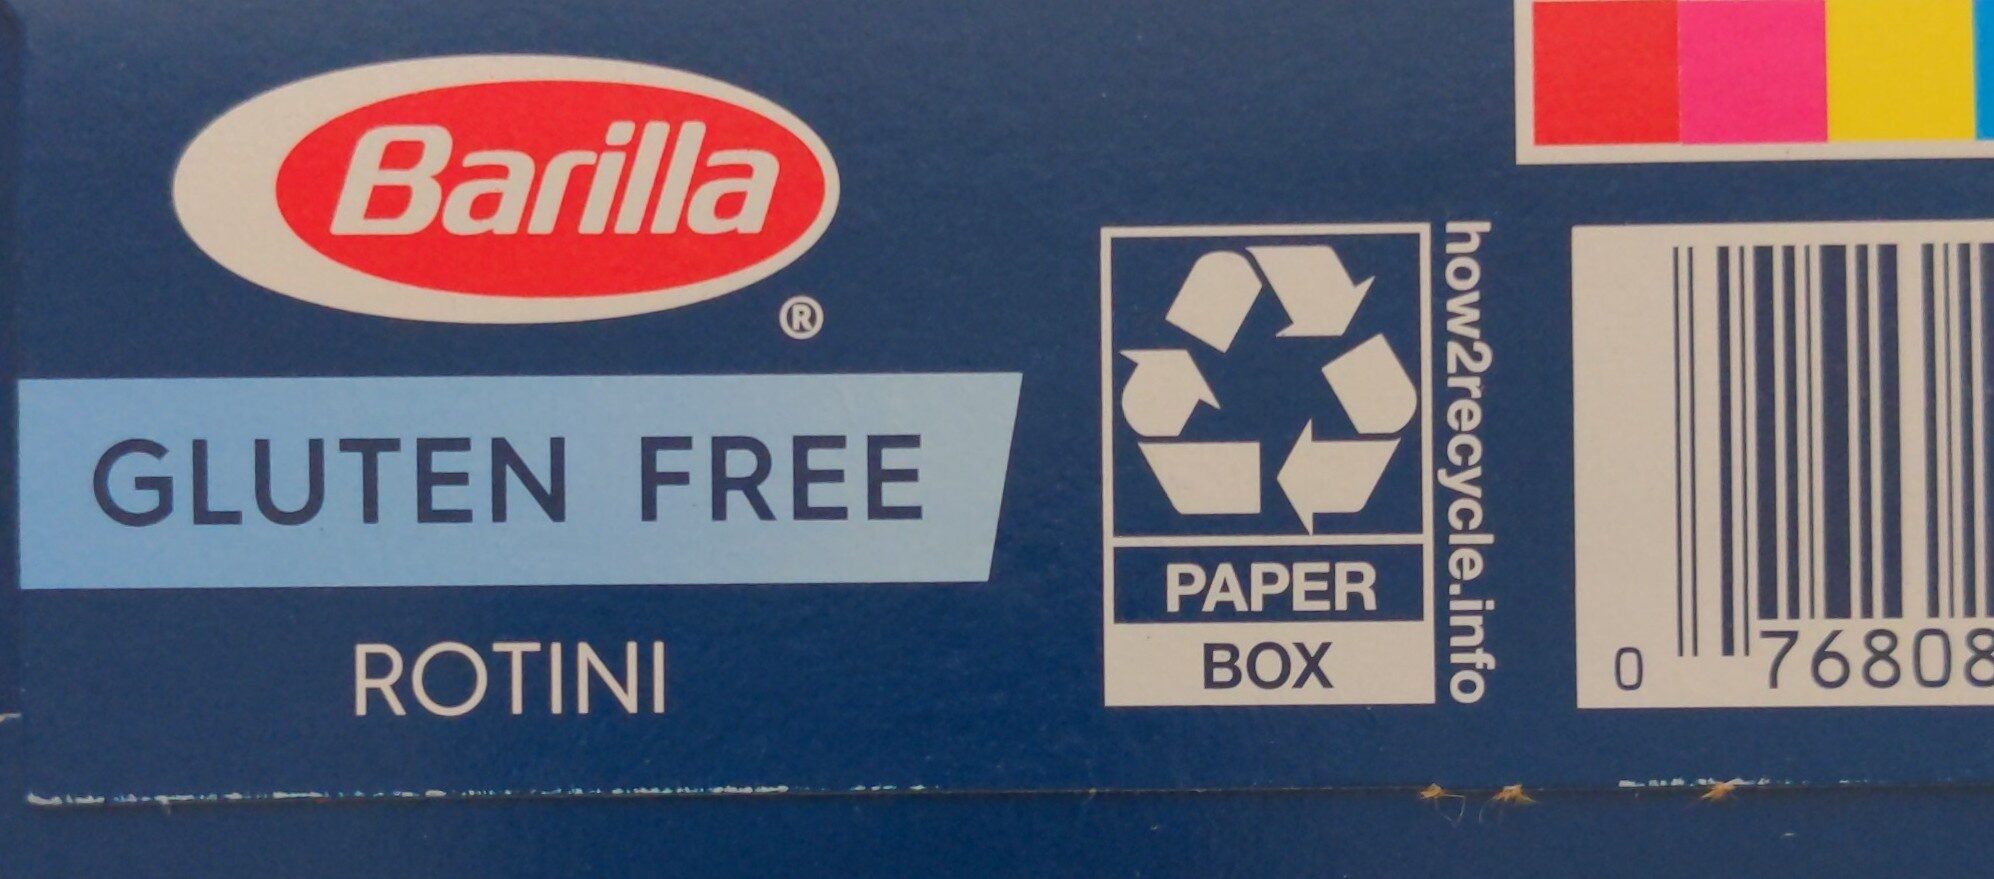 Gluten Free Rotini Pasta - Recycling instructions and/or packaging information